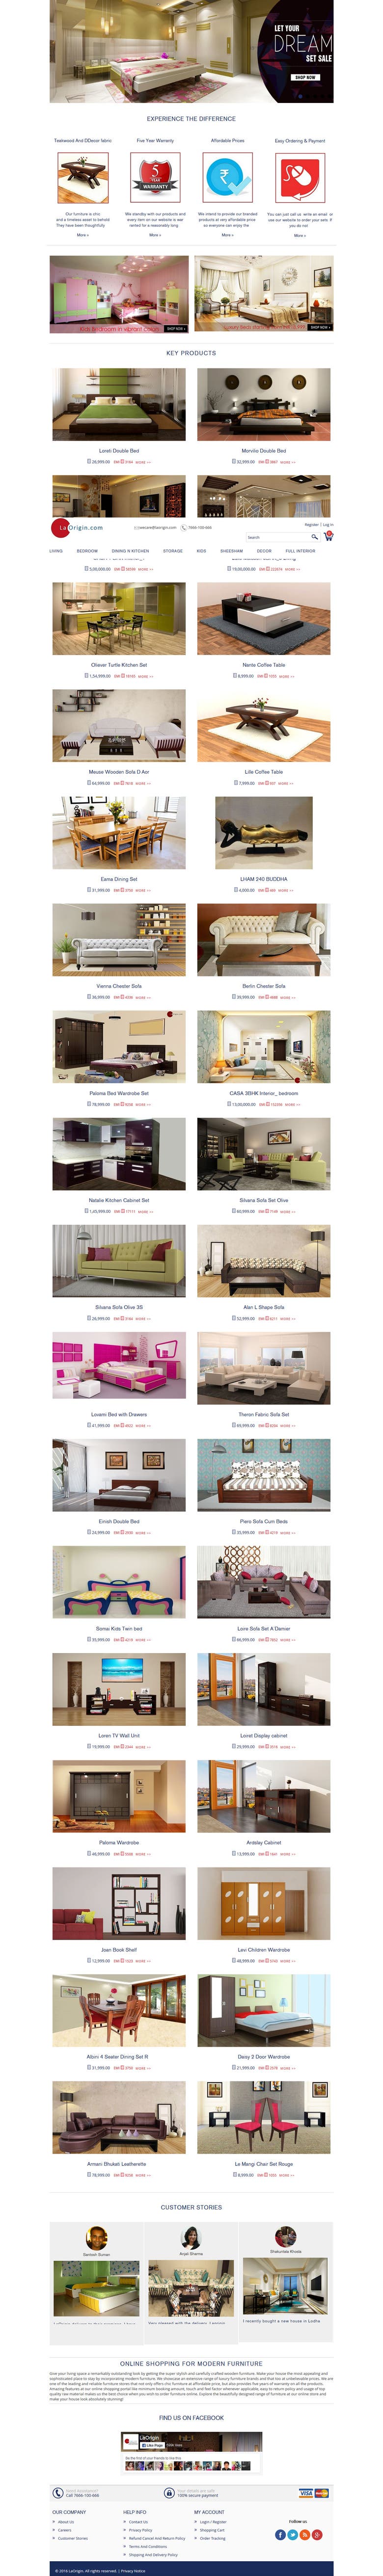 Nopcommerce store for Home Furnishings